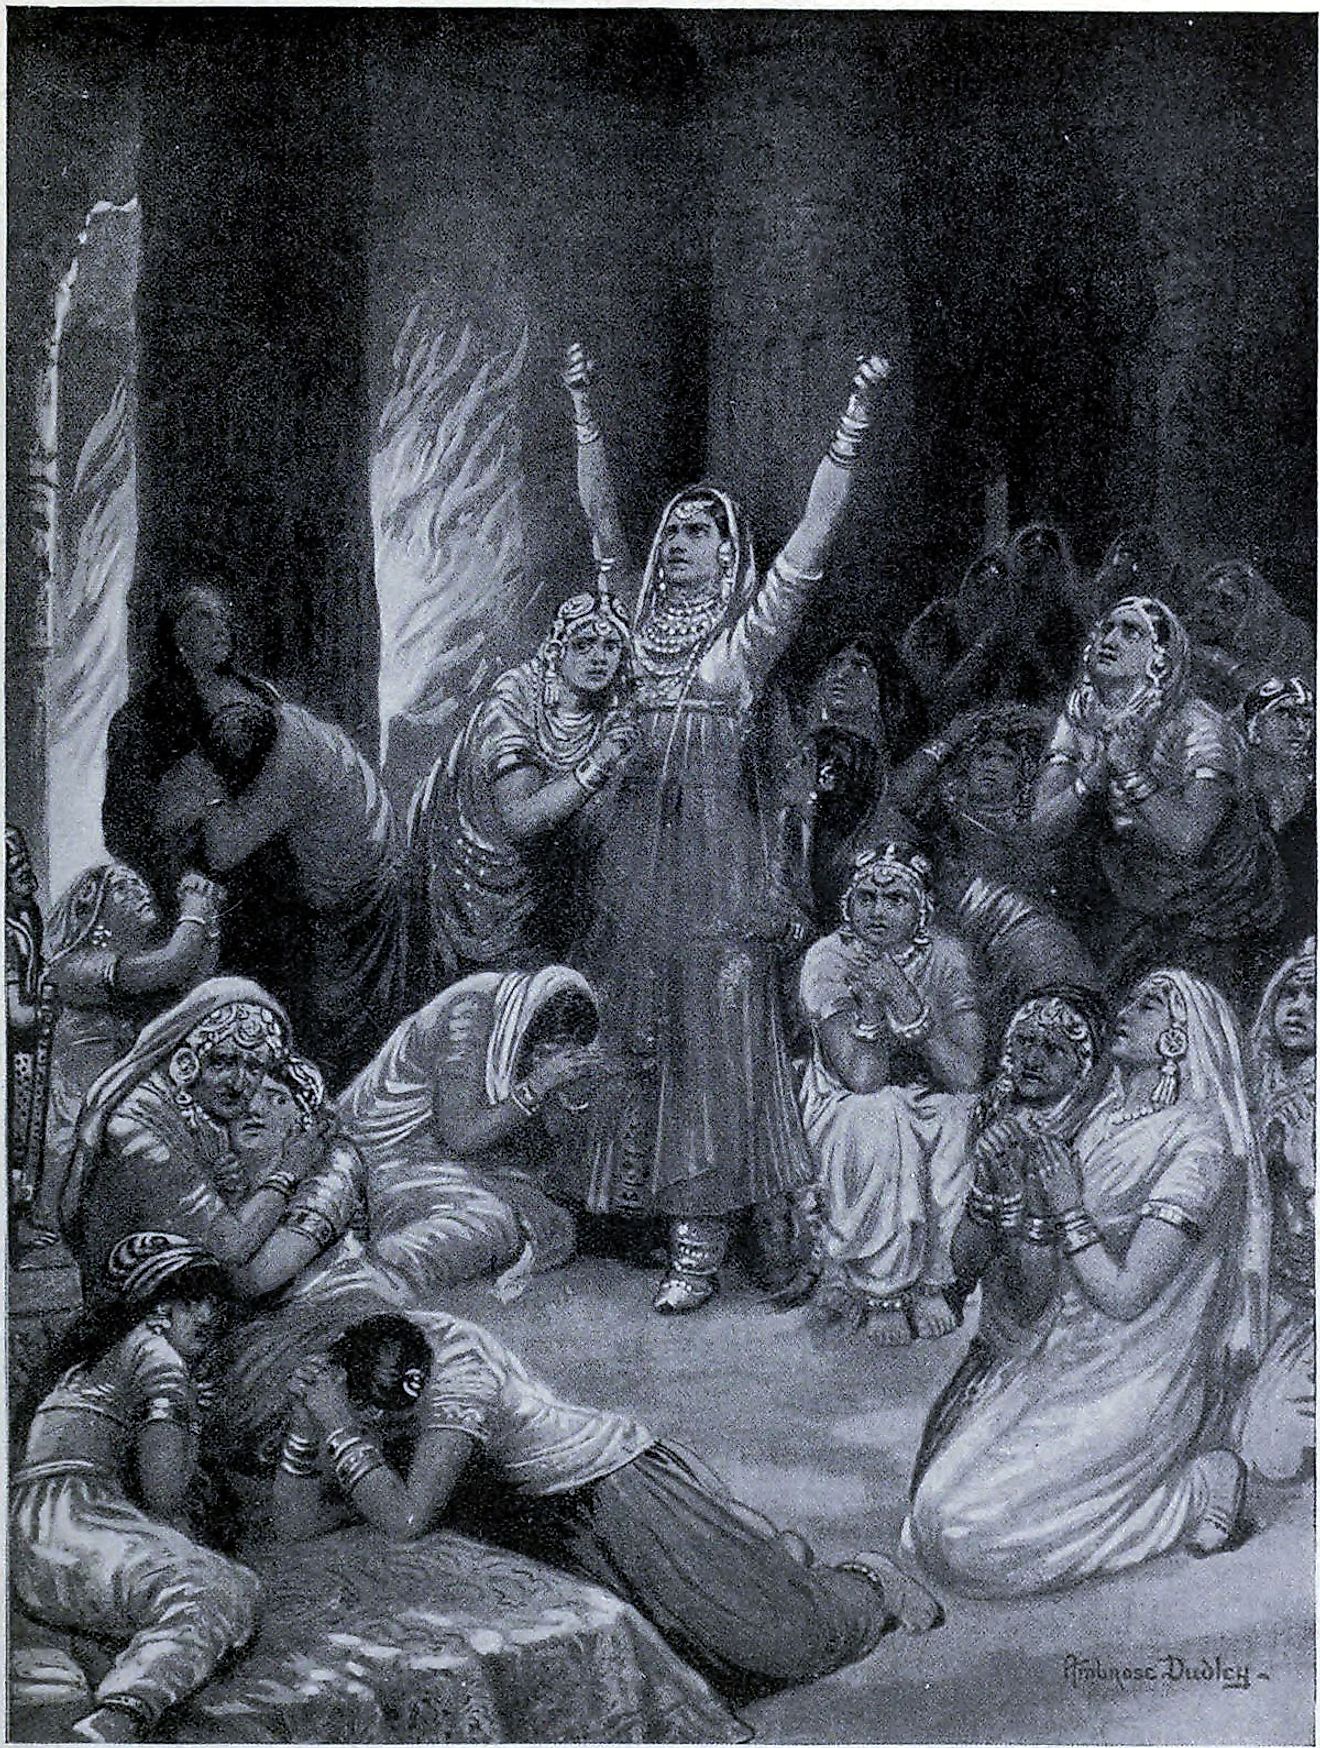 The Rajput ceremony of Jauhar, 1567, as depicted by Ambrose Dudley in Hutchinsons History of the Nations, c.1910. Image credit: Ambrose Dudley  (1867–1951)  United States public domain